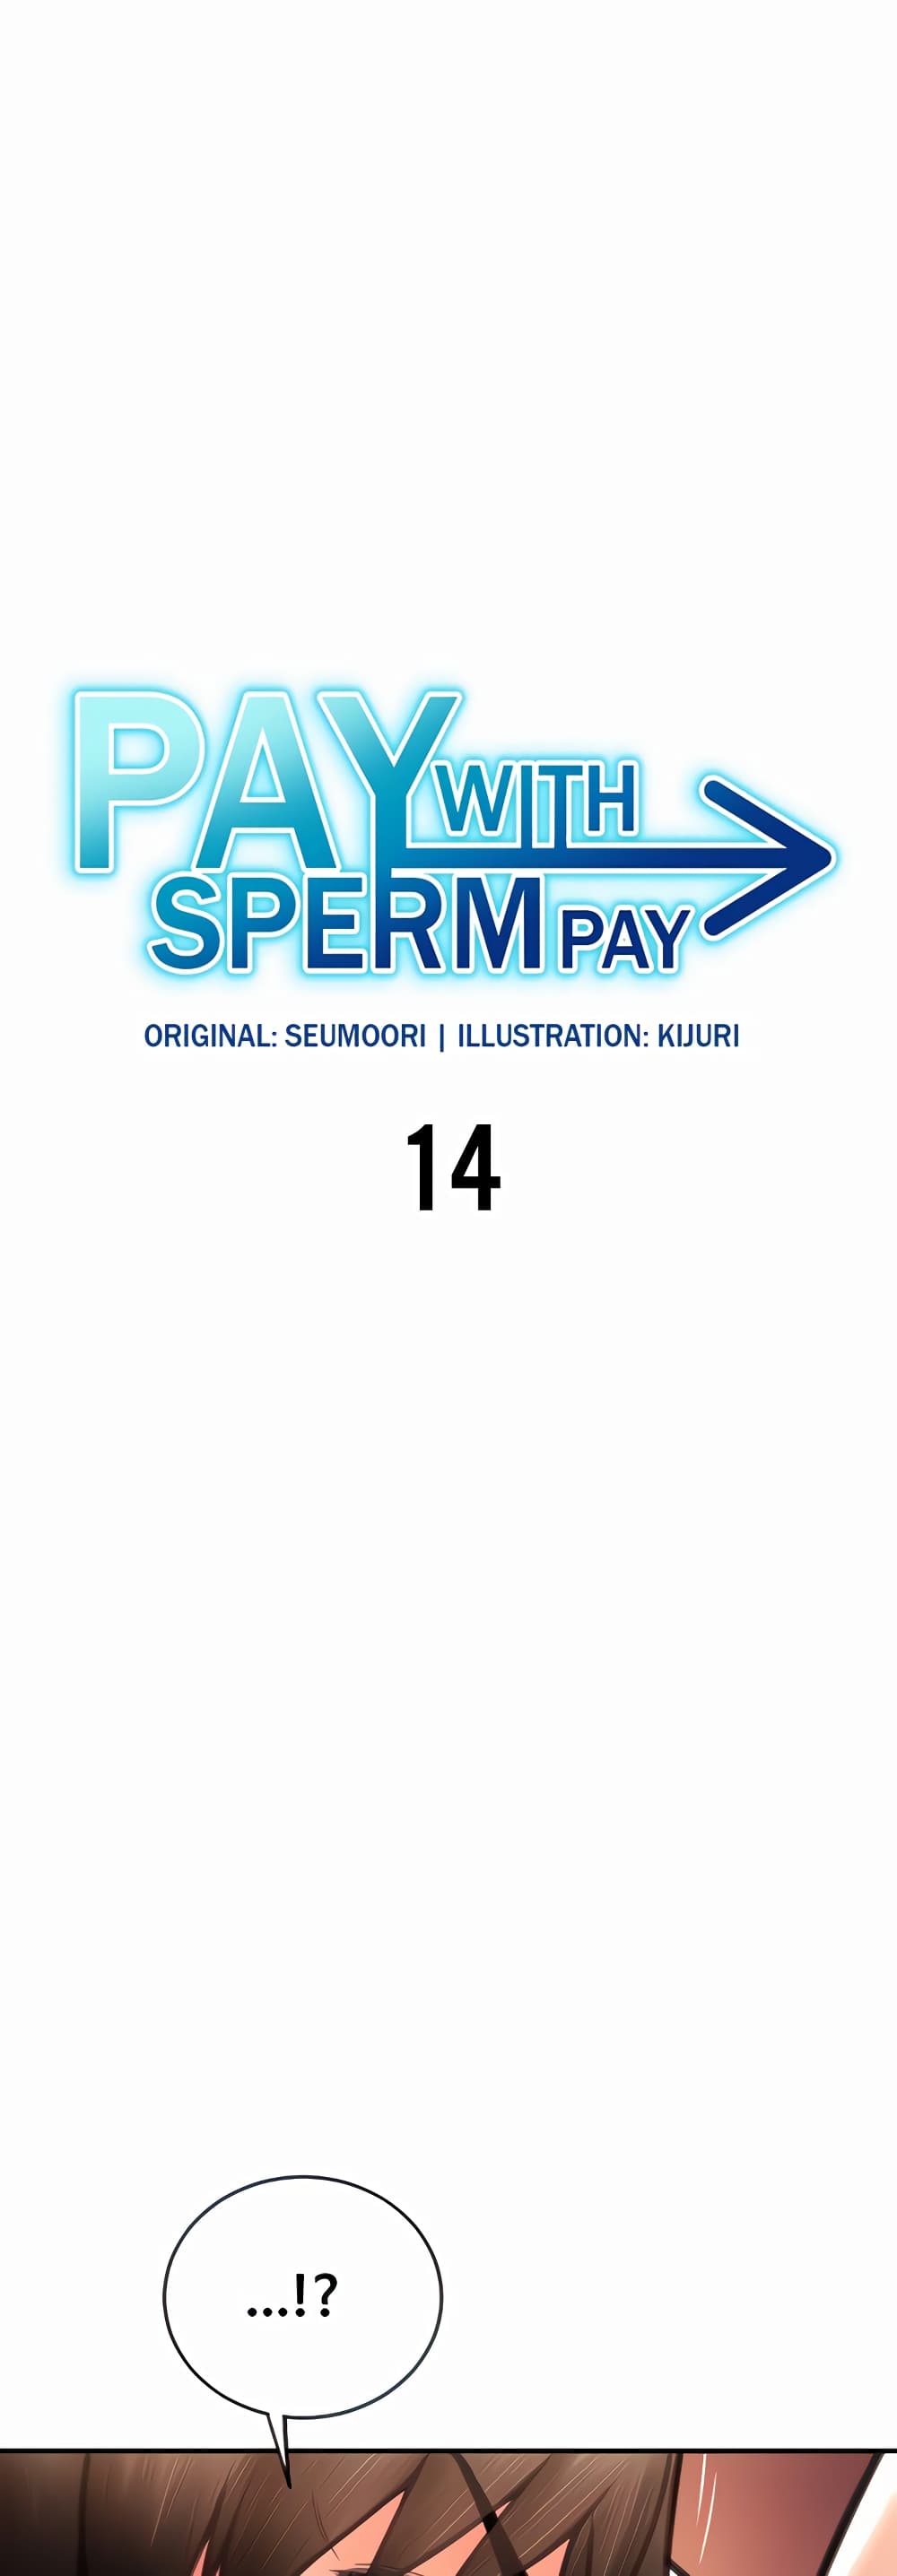 Pay with Sperm Pay 14 (1)